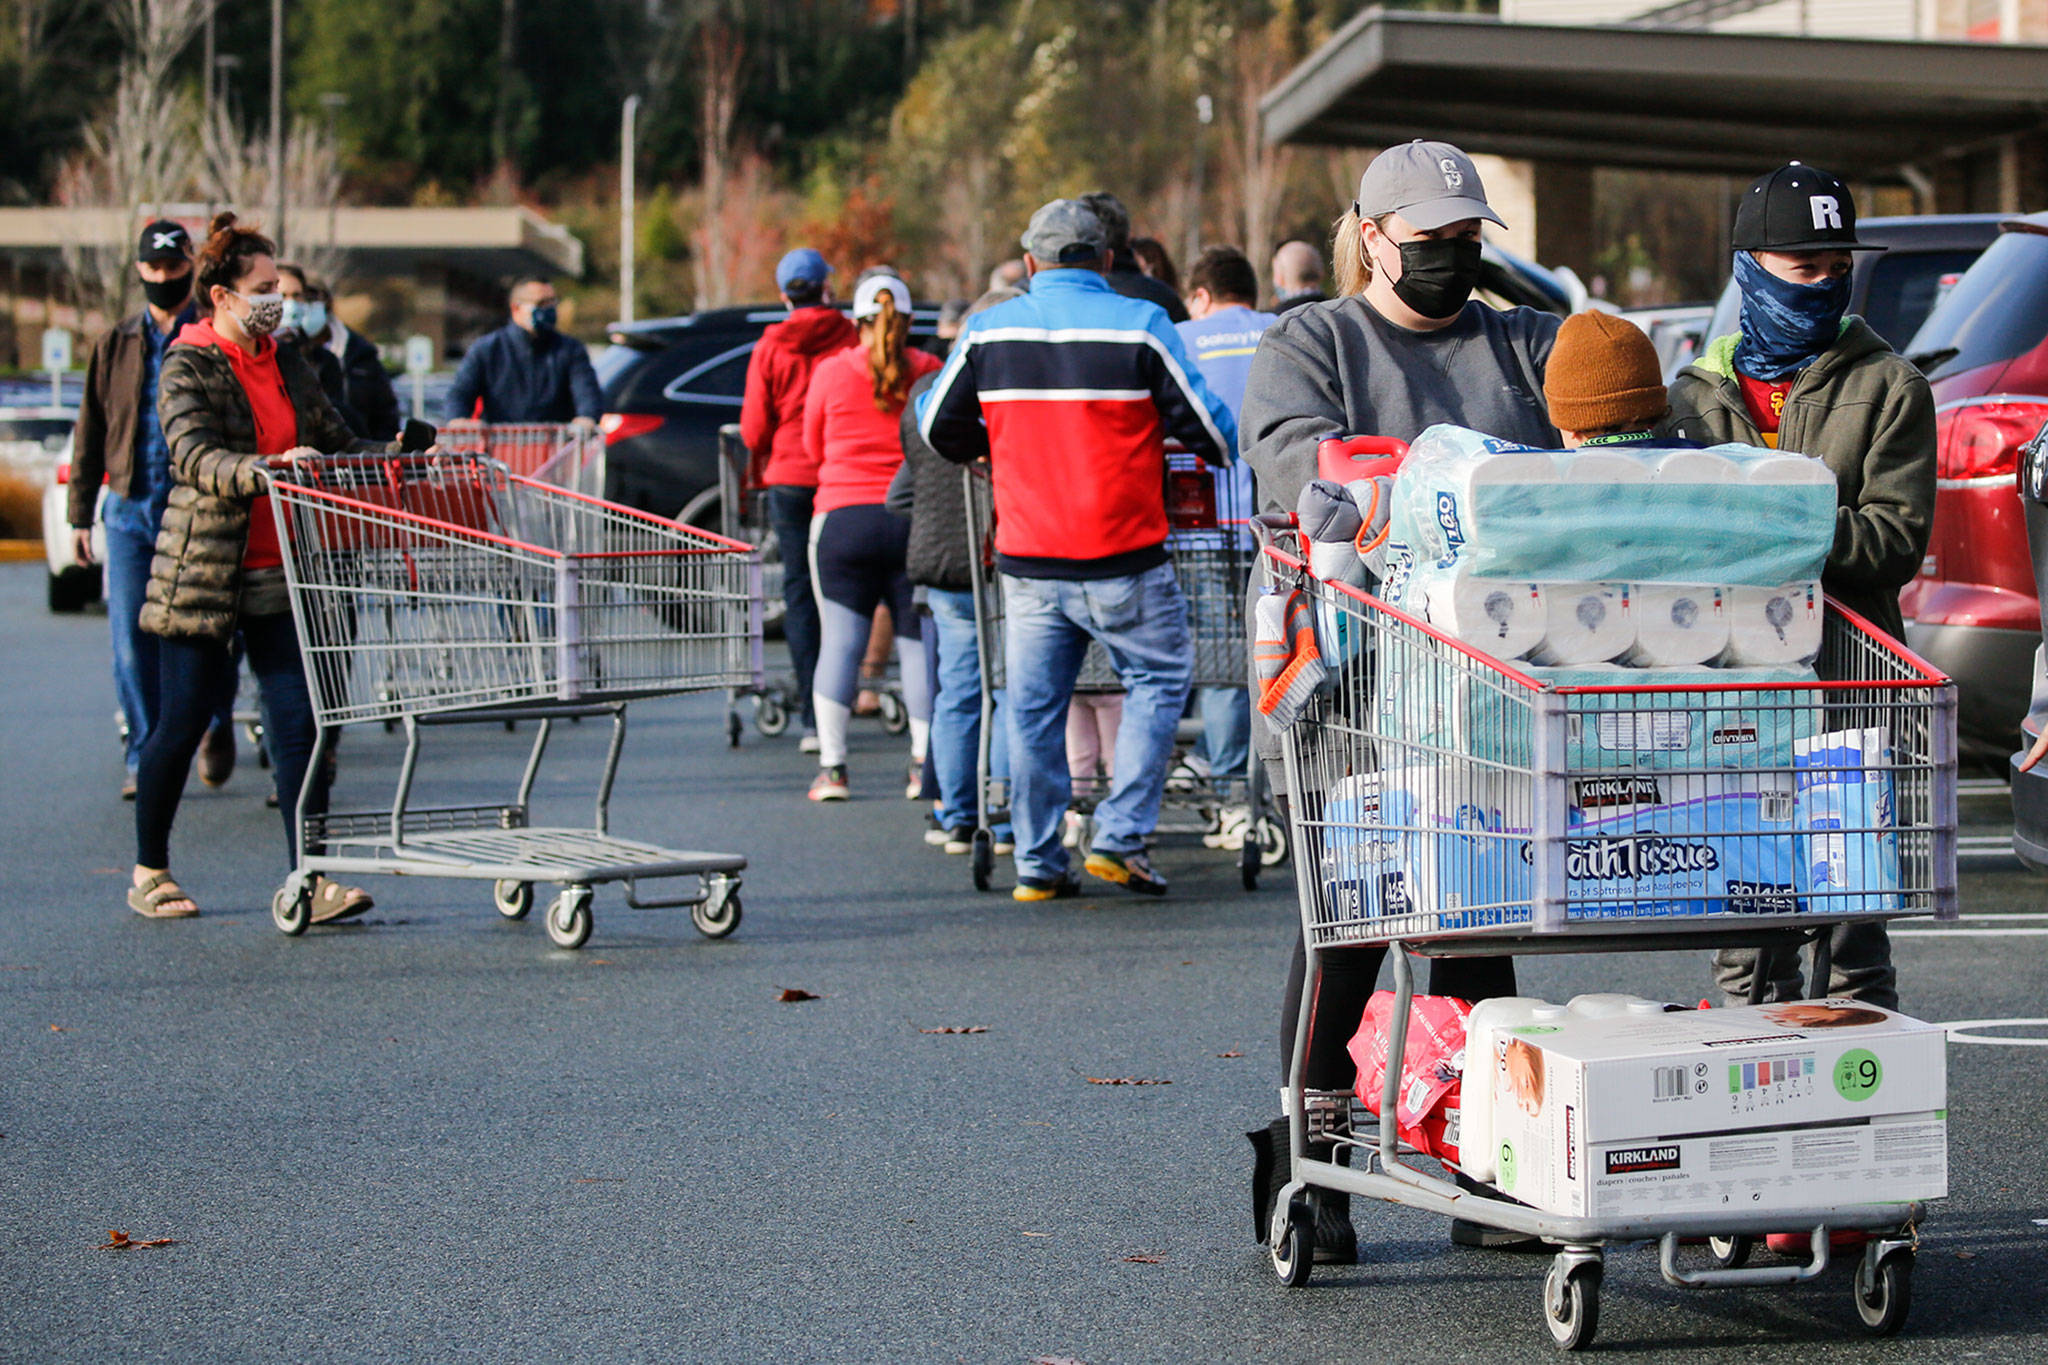 Costso customers unload groceries as the line to get in grows Sunday morning in Lynnwood. (Kevin Clark / The Herald)